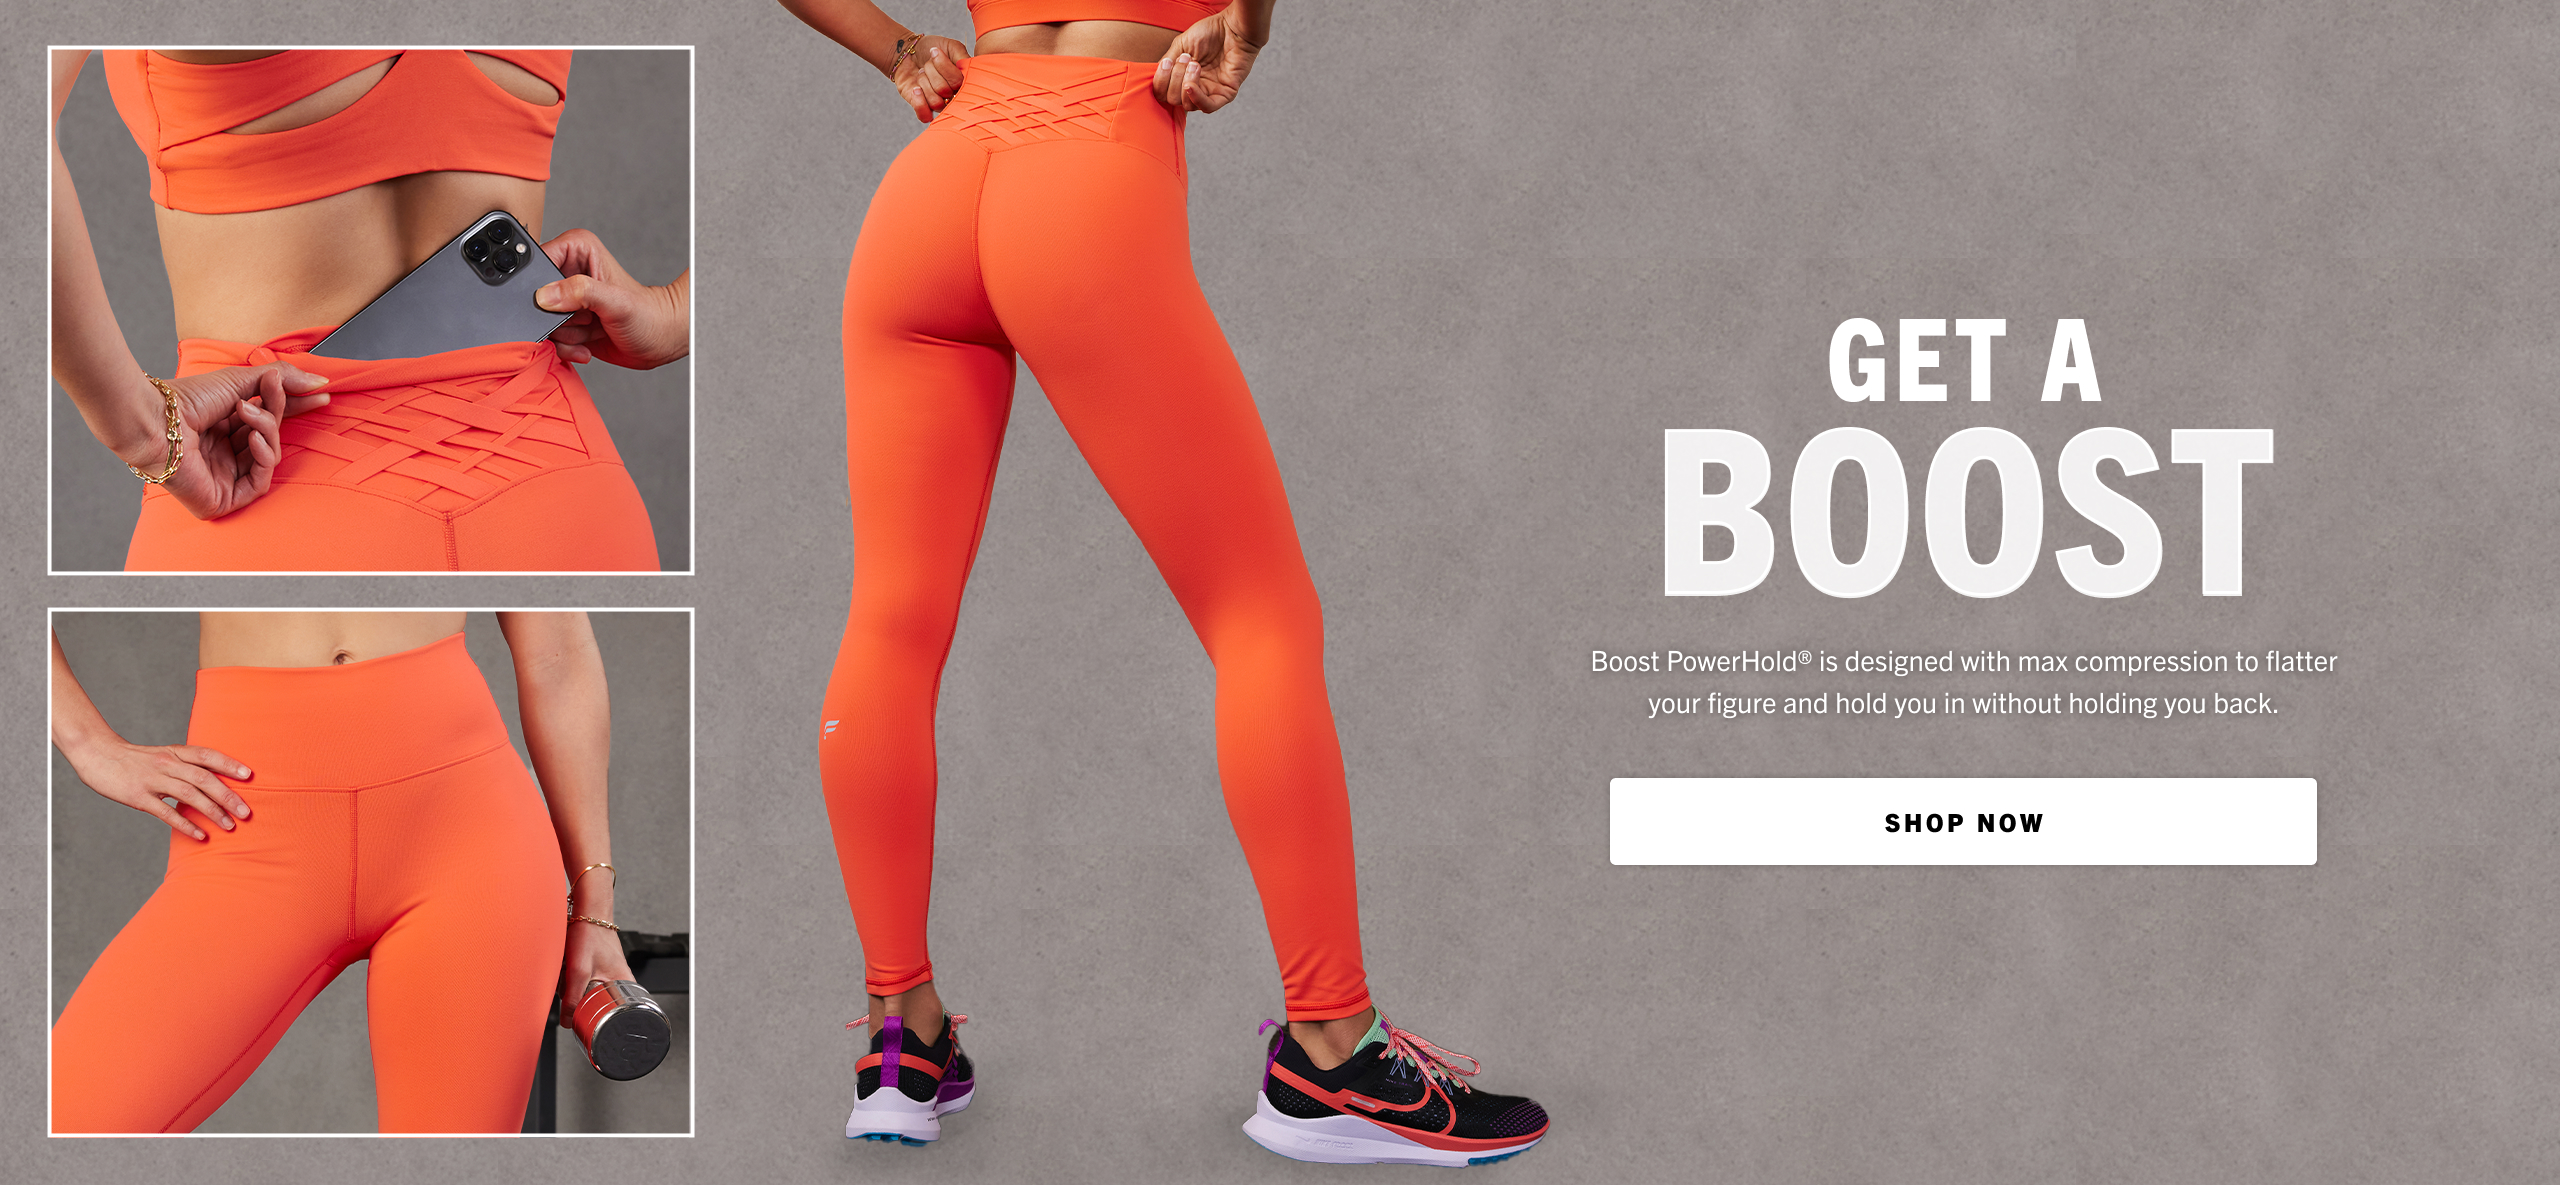 Take the quiz and start shopping our best selling styles like the Boost legging. Designed with max compression to flatter your figure and hold you in without holding you back.